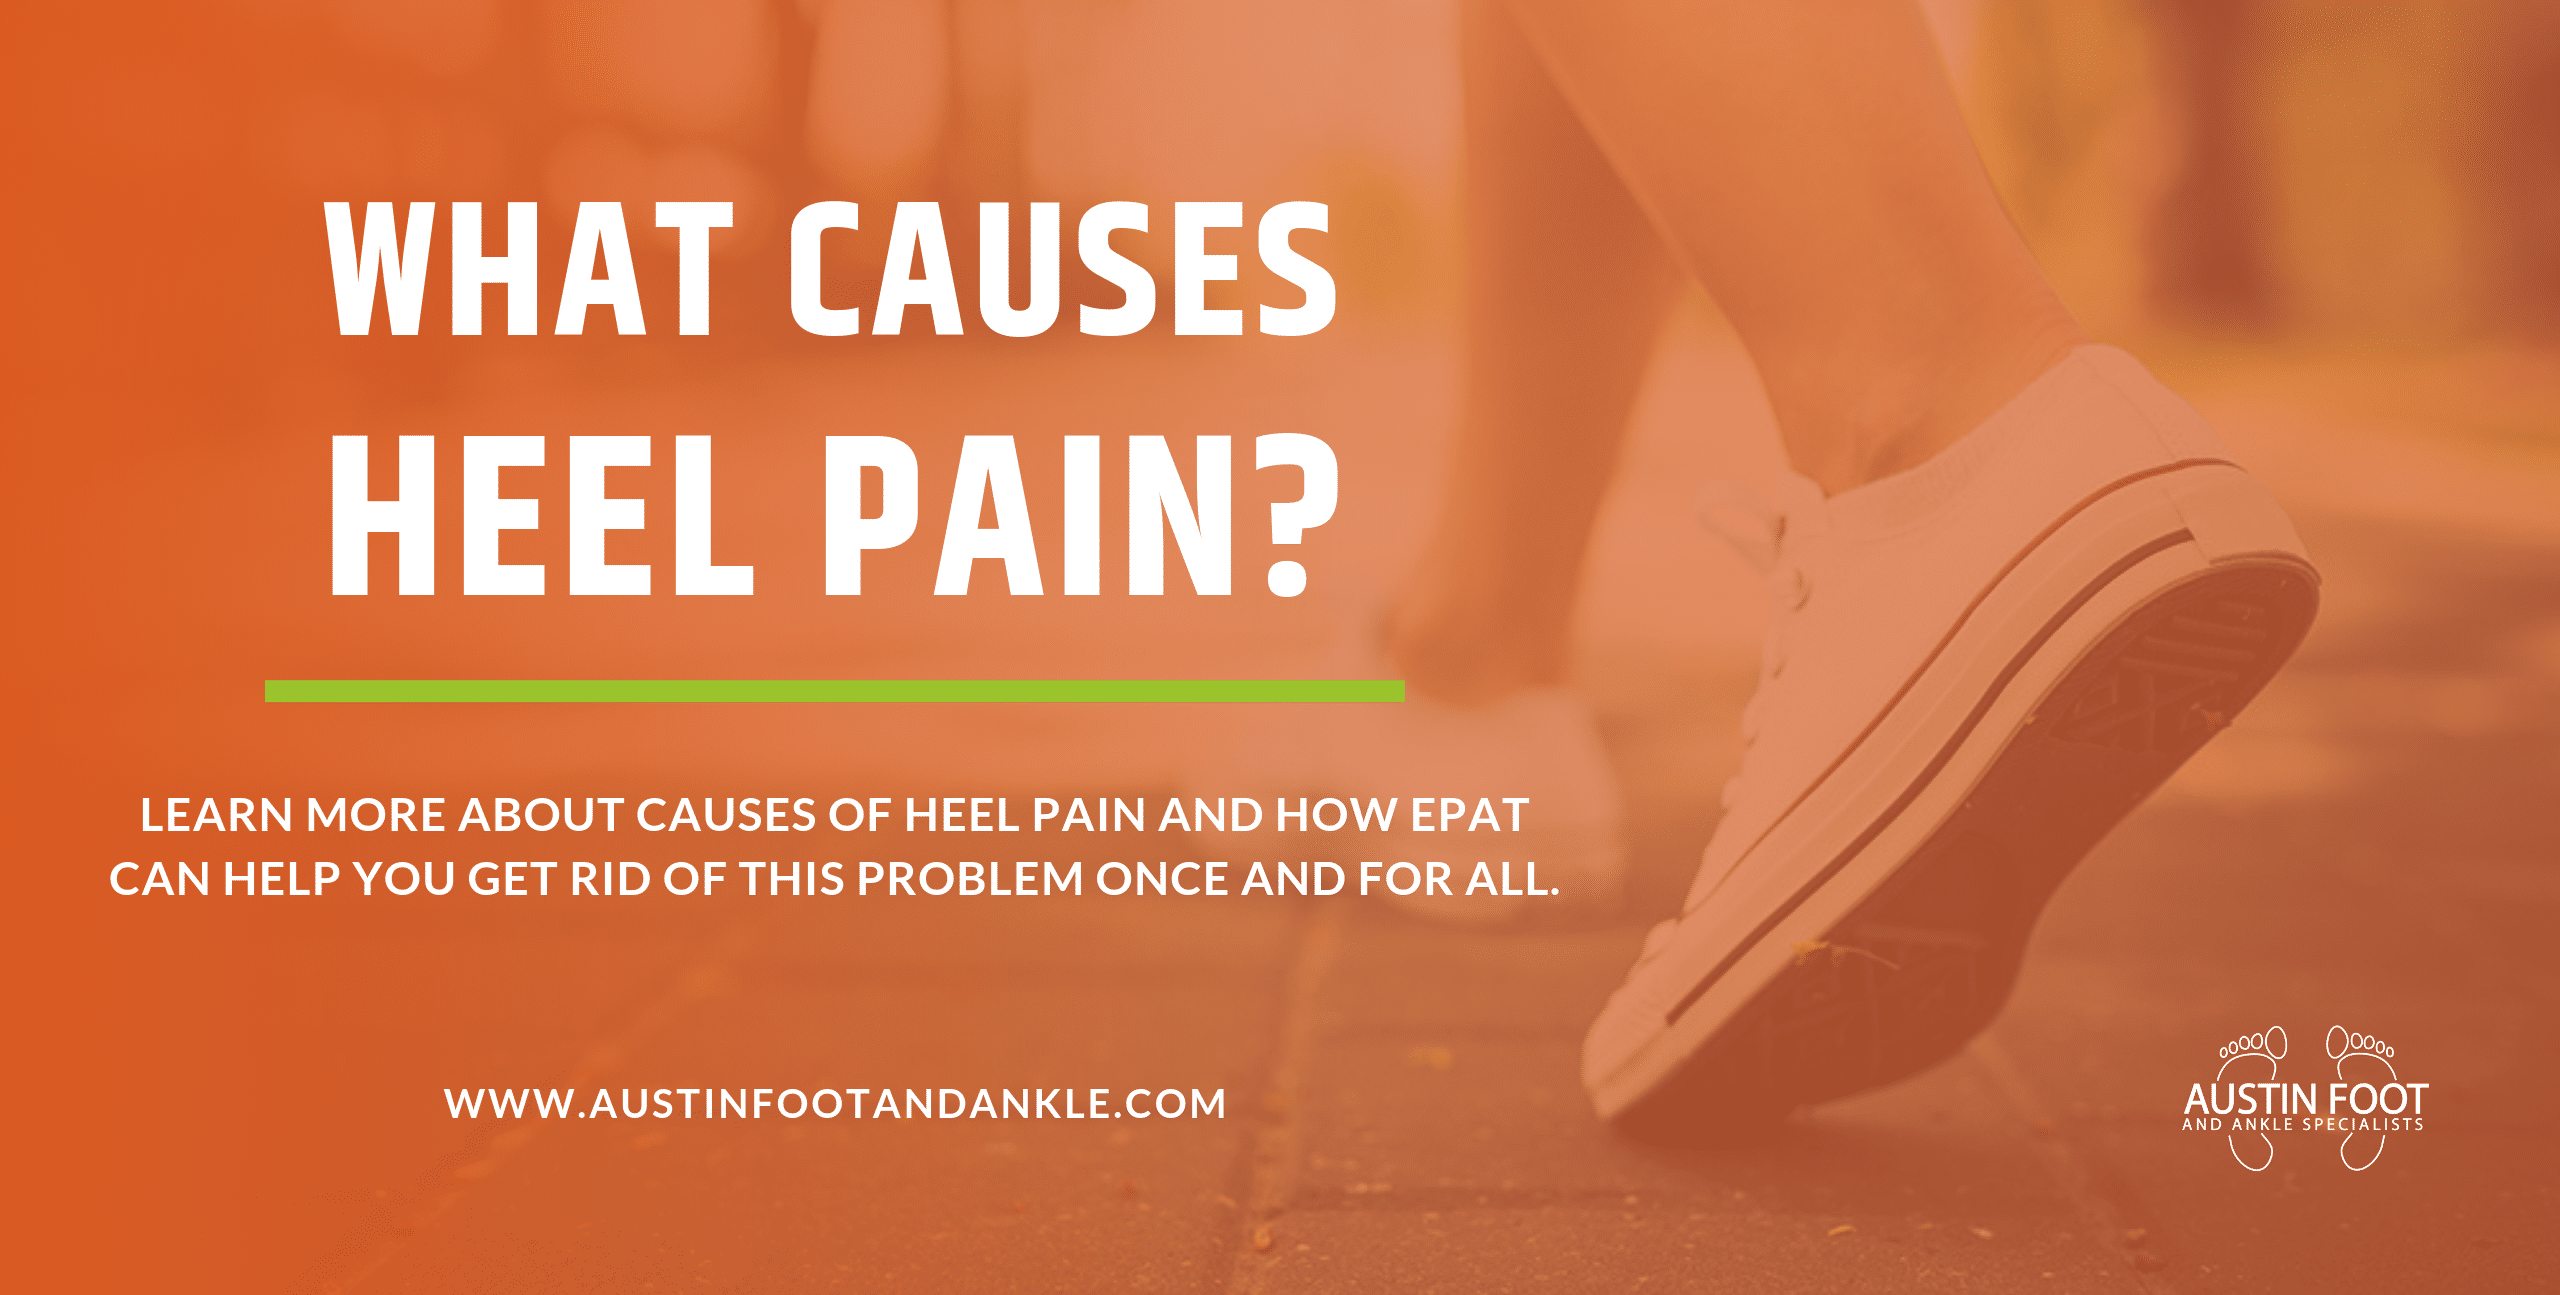 7 Little-Known Plantar Fasciitis Exercises To Relieve Foot Pain